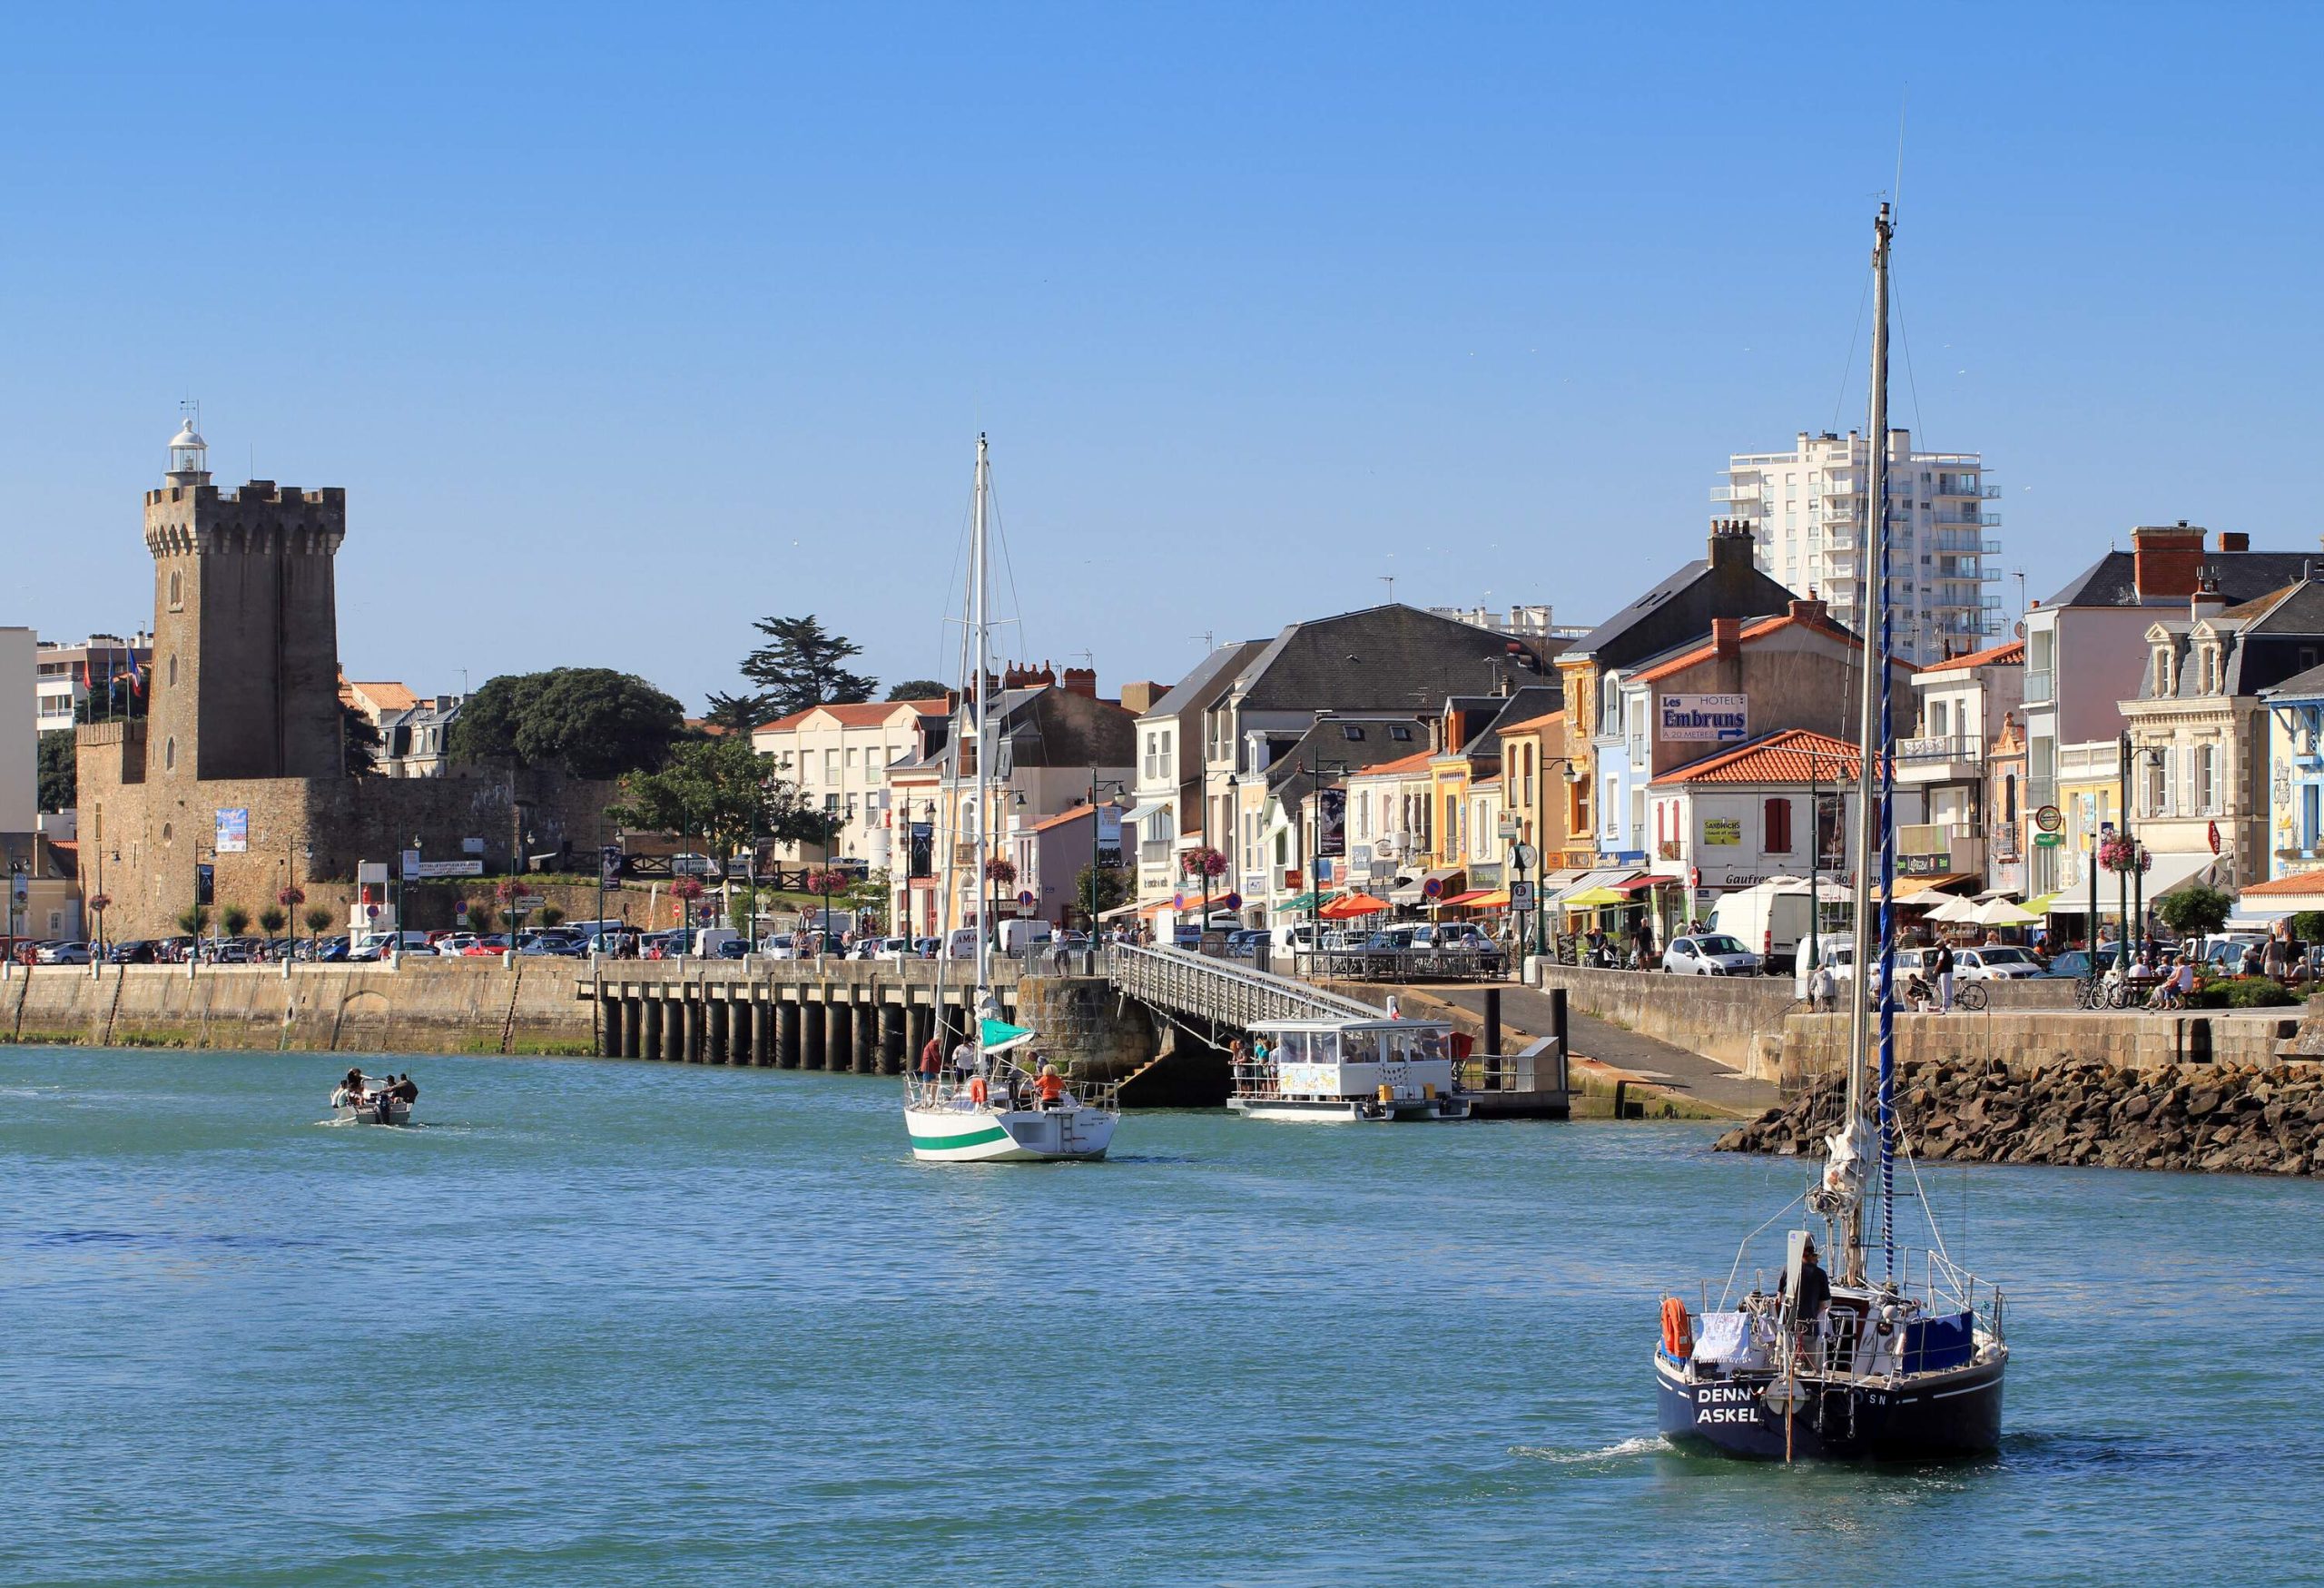 Boats pass in front of a seaside town with a tower made of brick that looks out over the water.